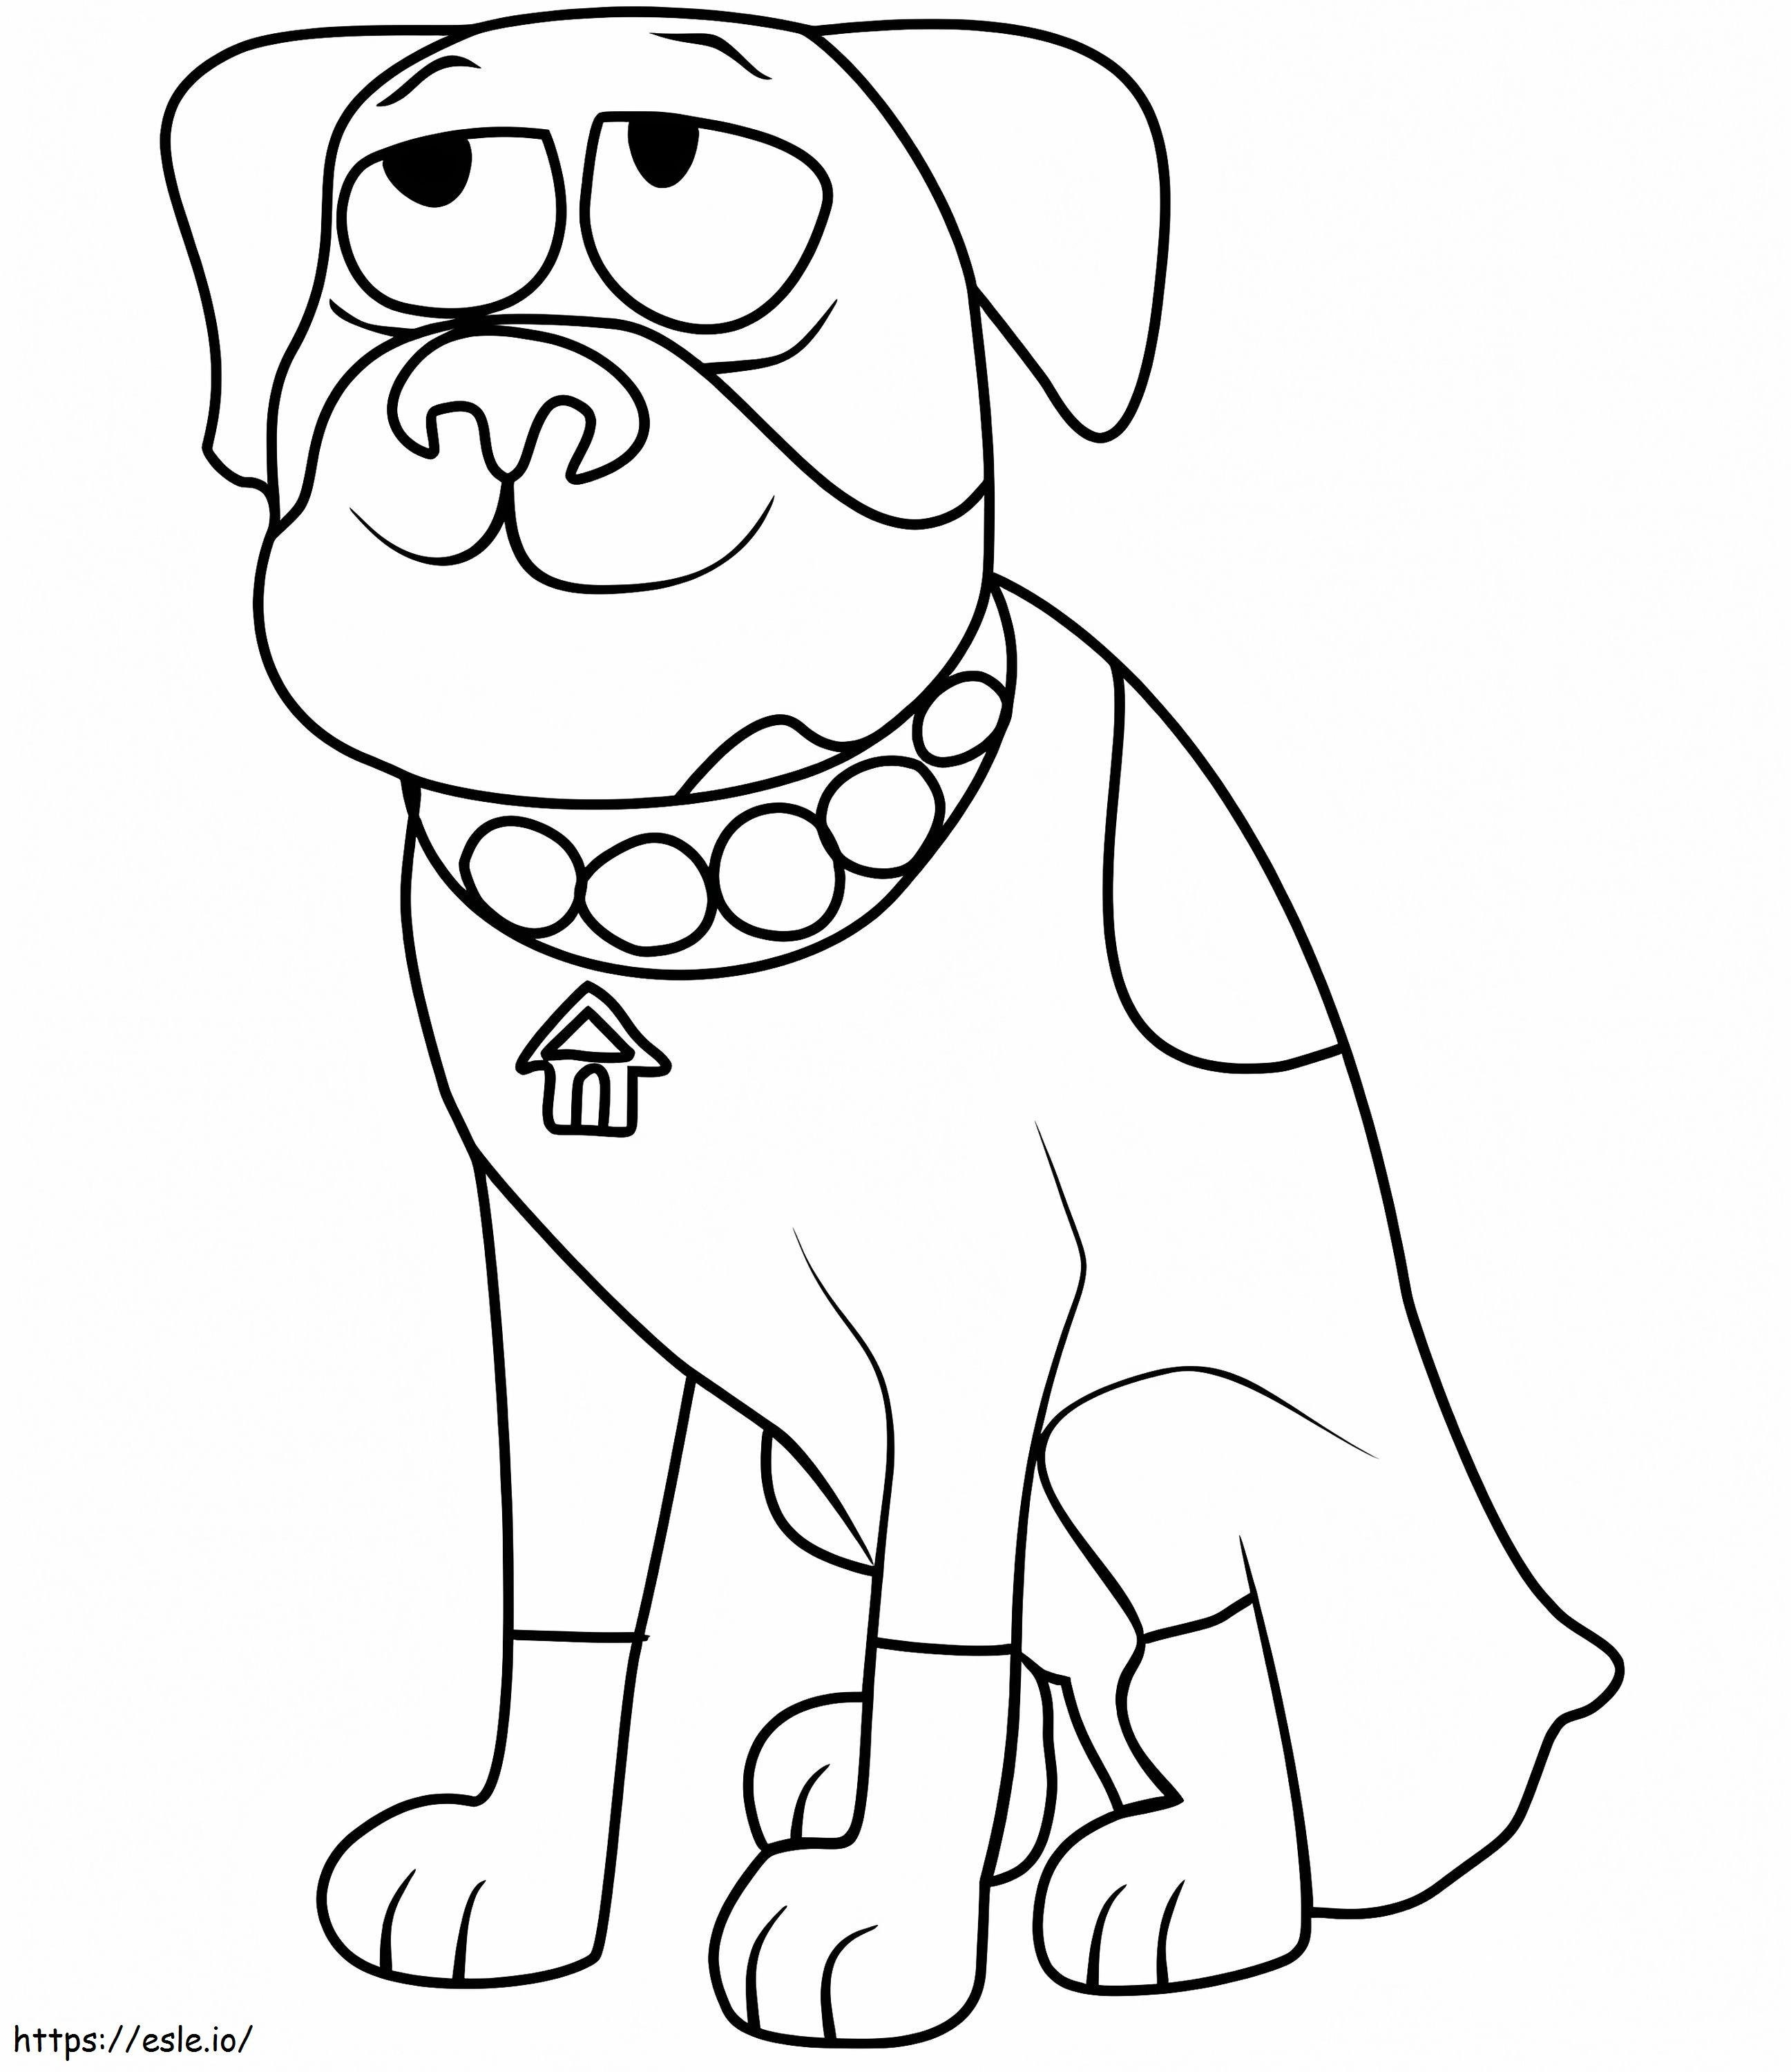 Tyson From Pound Puppies coloring page